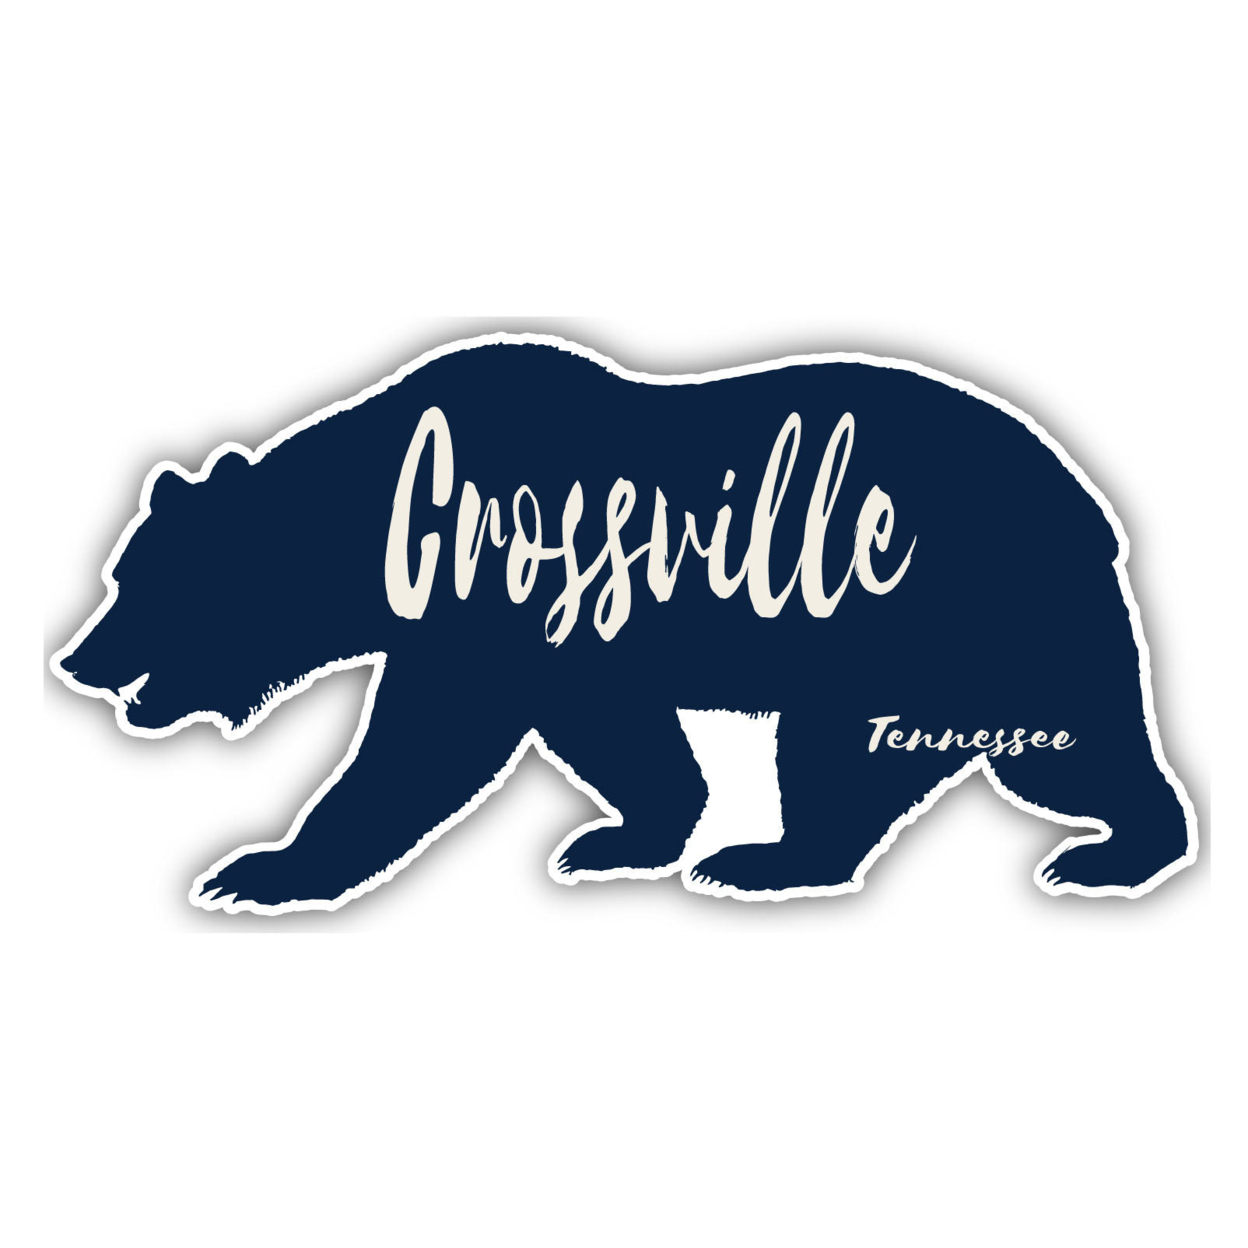 Crossville Tennessee Souvenir Decorative Stickers (Choose Theme And Size) - 4-Pack, 10-Inch, Tent